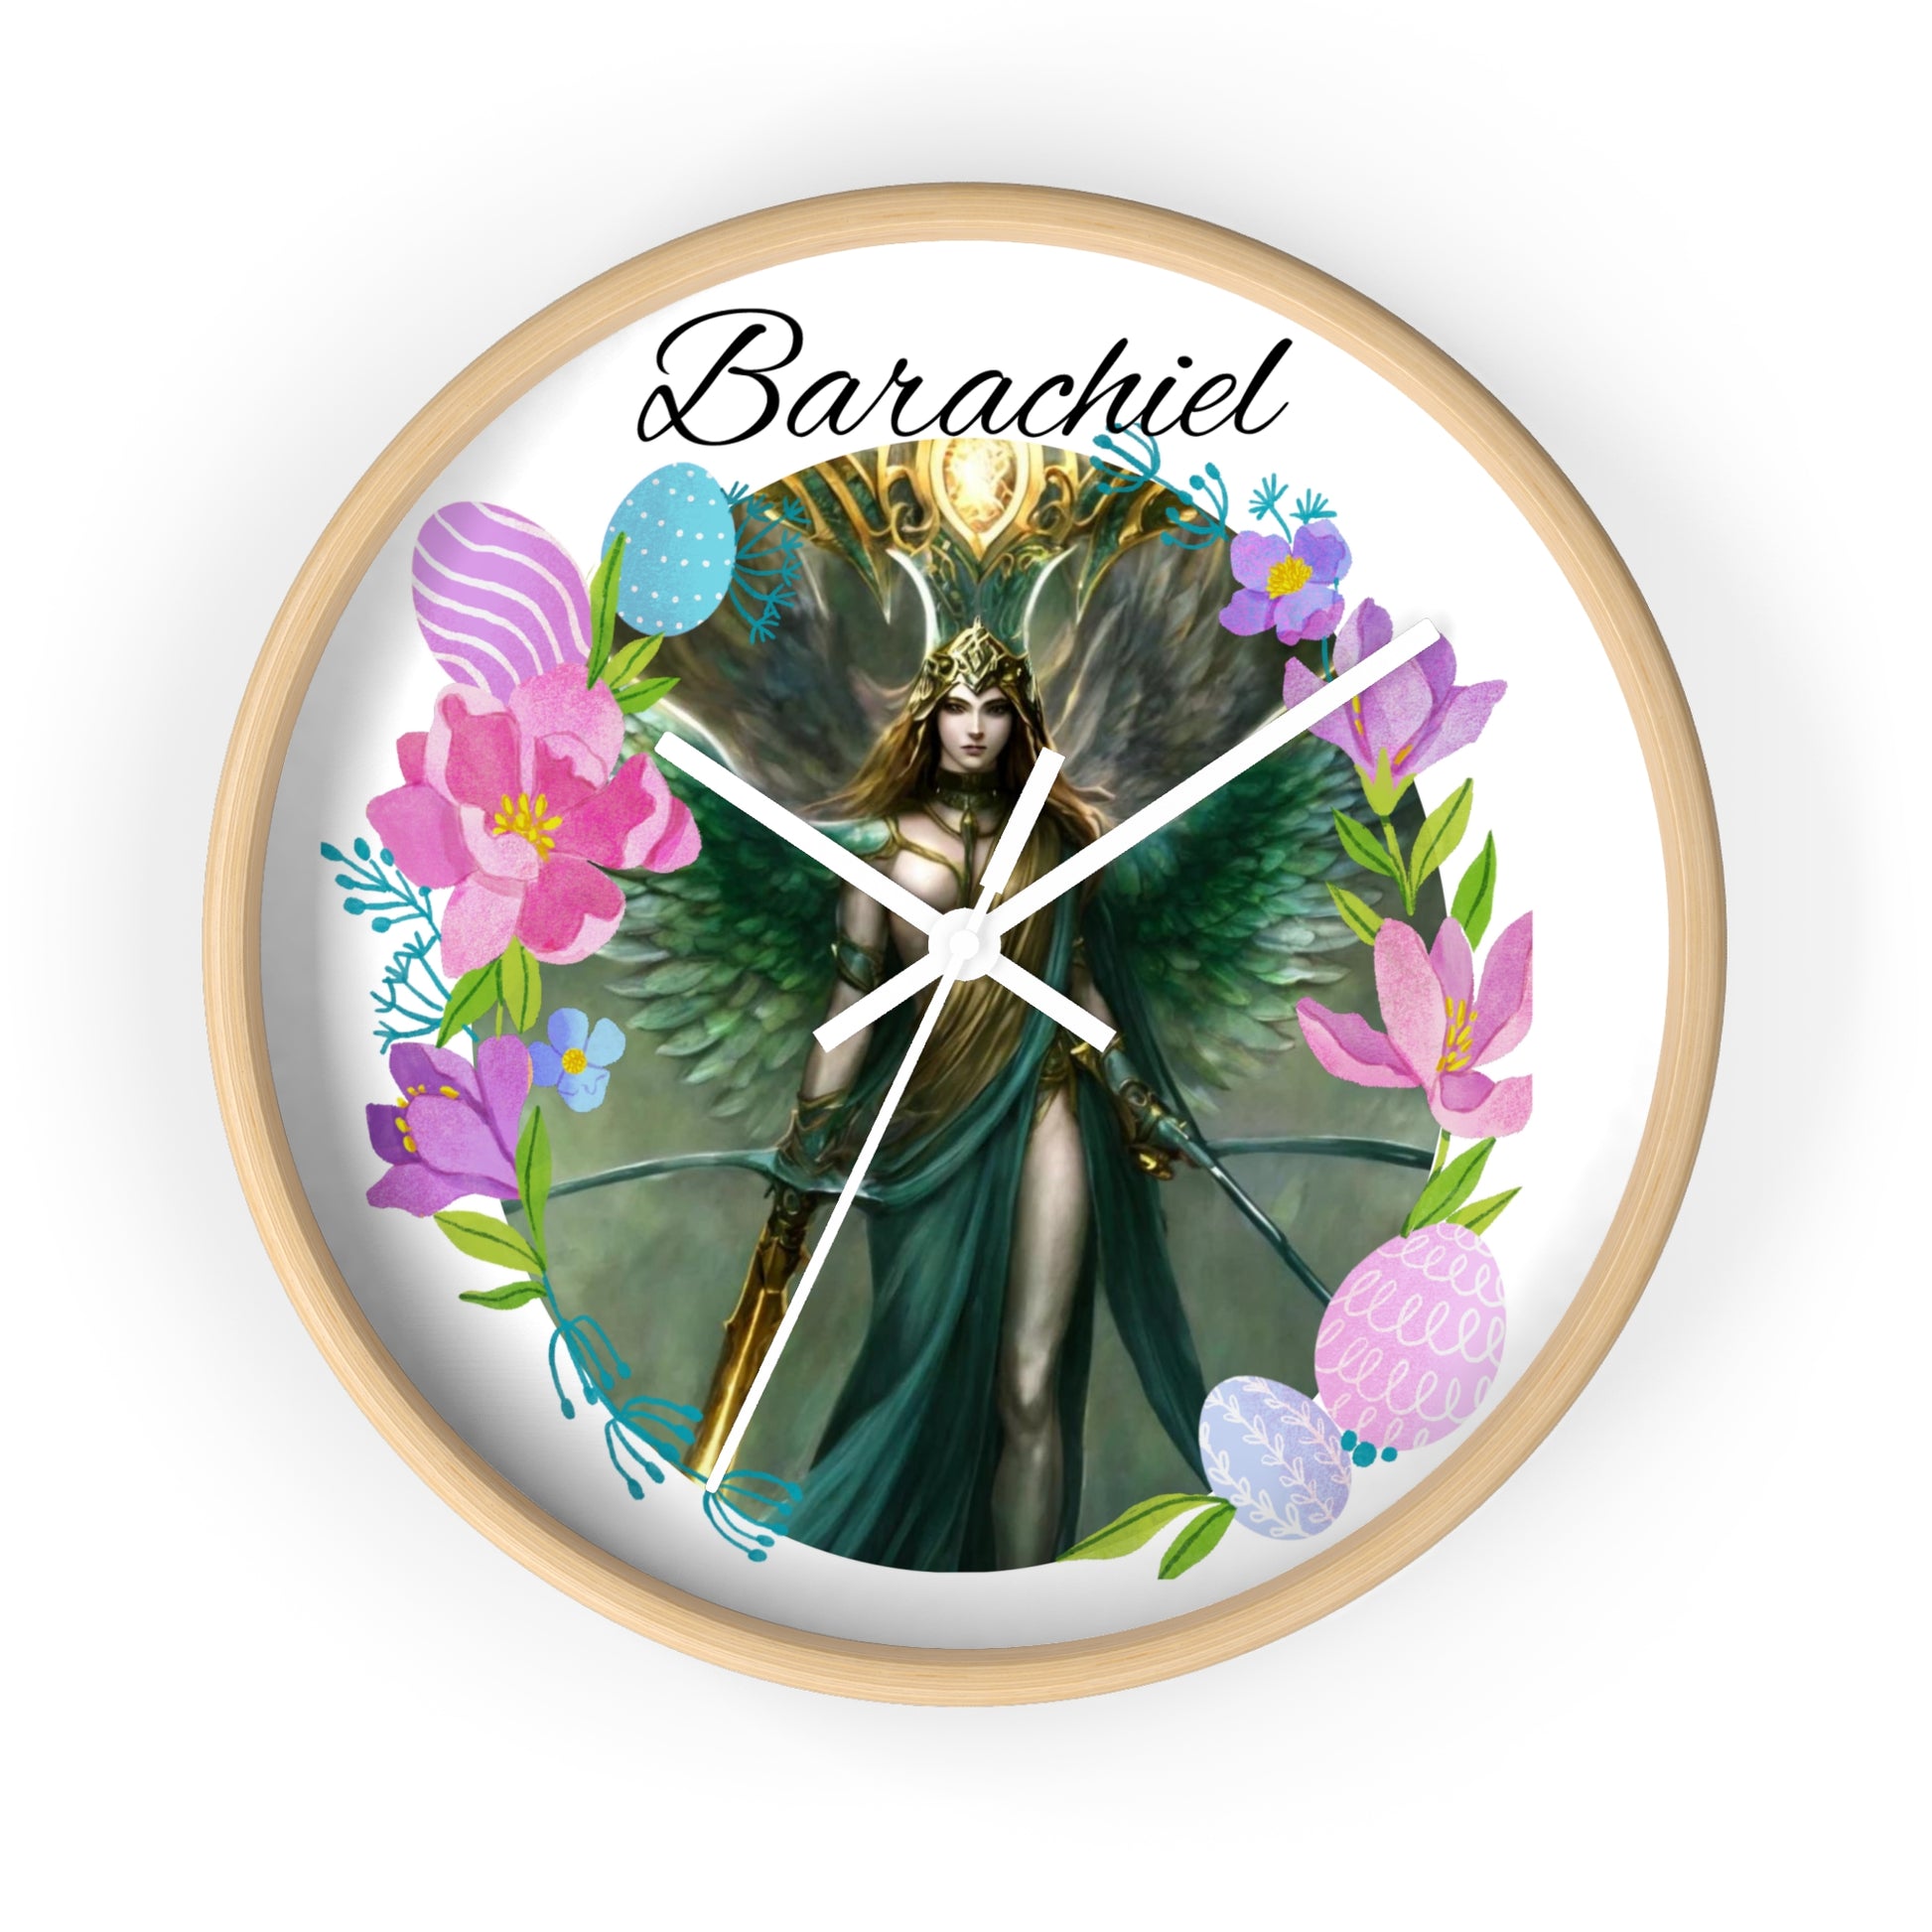 Archangel Barachiel Wall Clock - Angelic Thrones: Your Gateway to the Angelic Realms